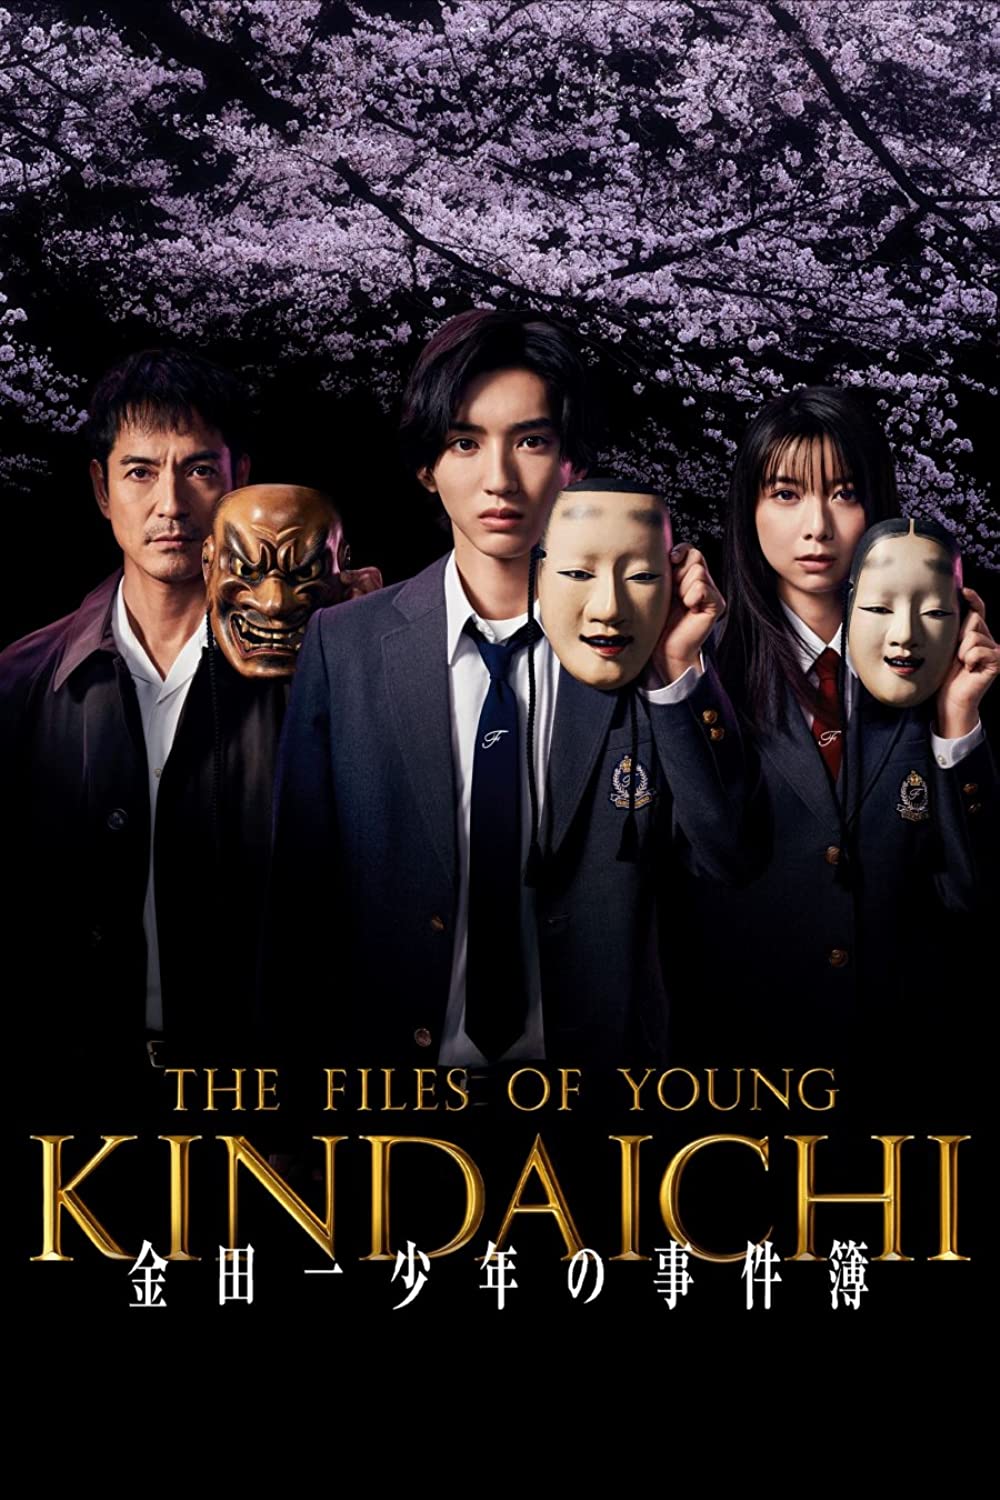 Download The Files of Young Kindaichi 2023 S01 Complete Hindi ORG Dual Audio 480p HDRip MSub 1.7GB